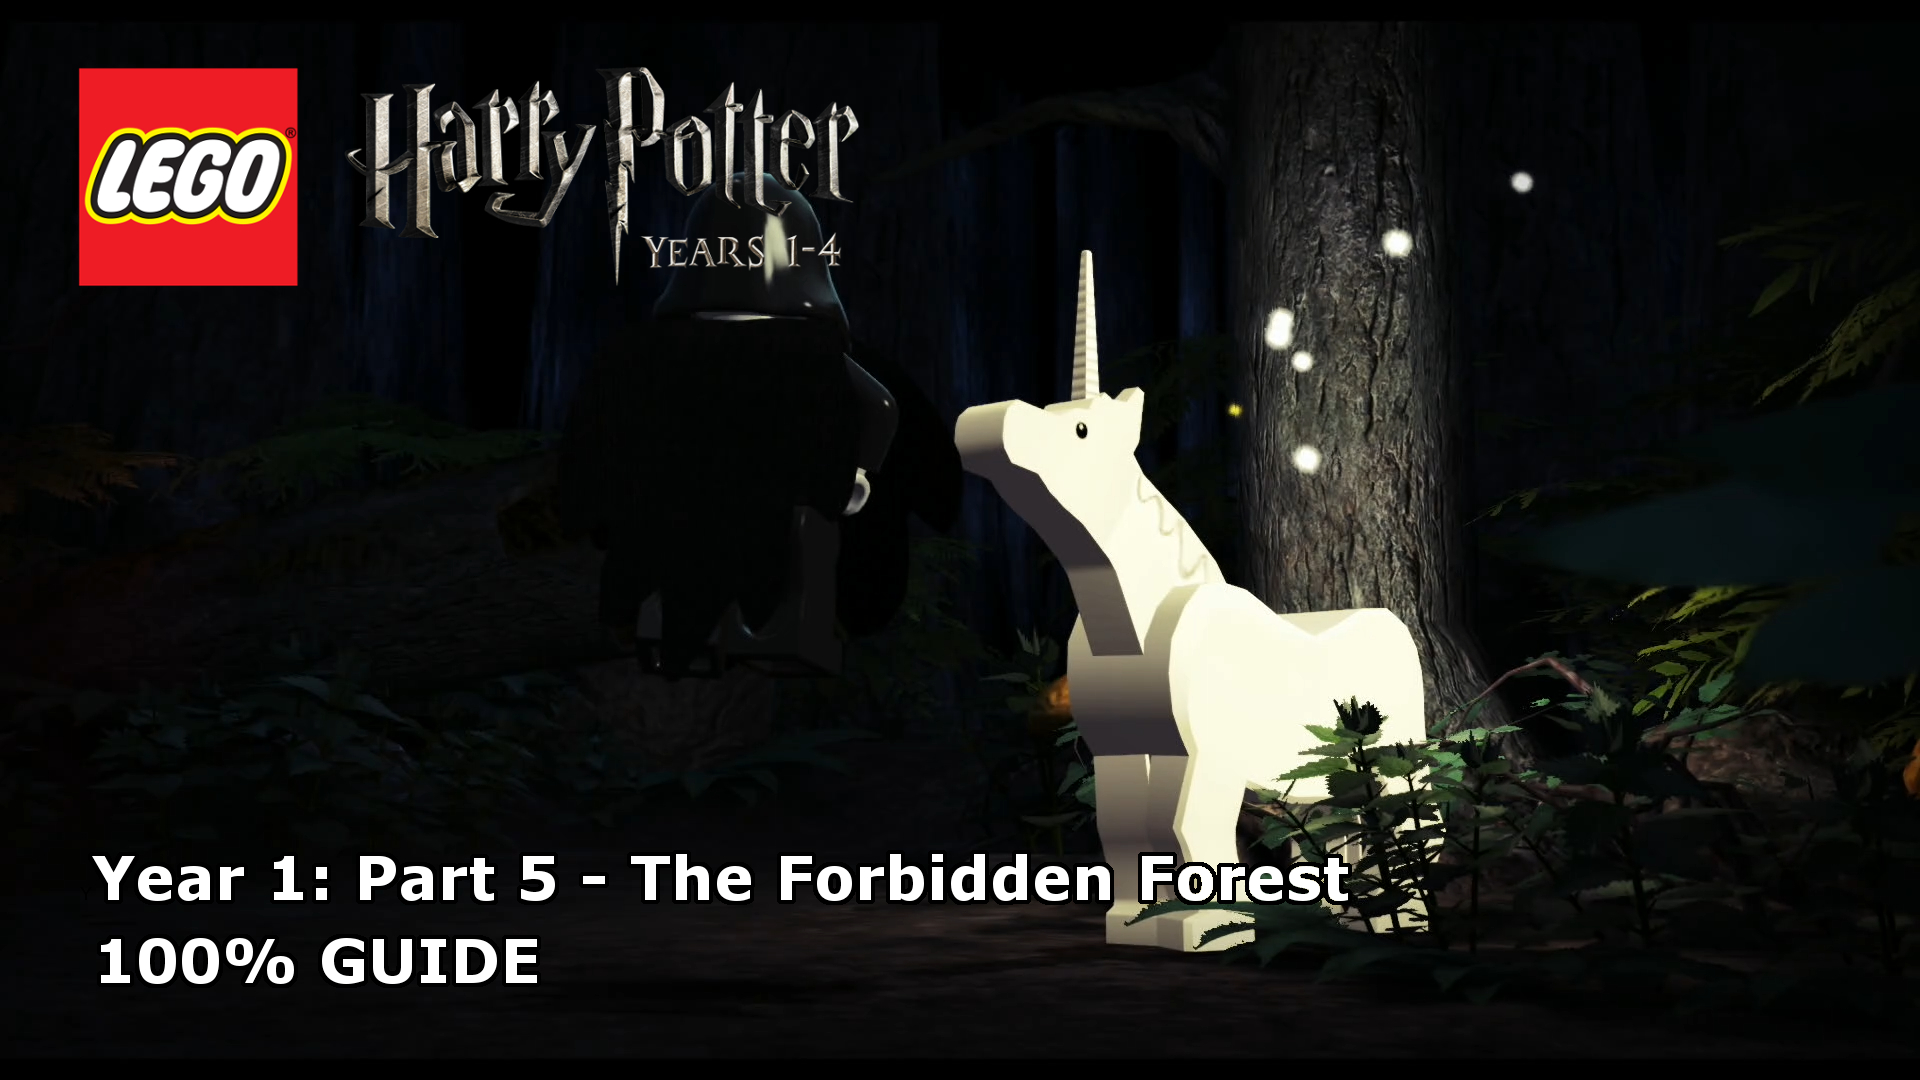 lego-harry-potter-years-1-4-the-forbidden-forest-100-guide